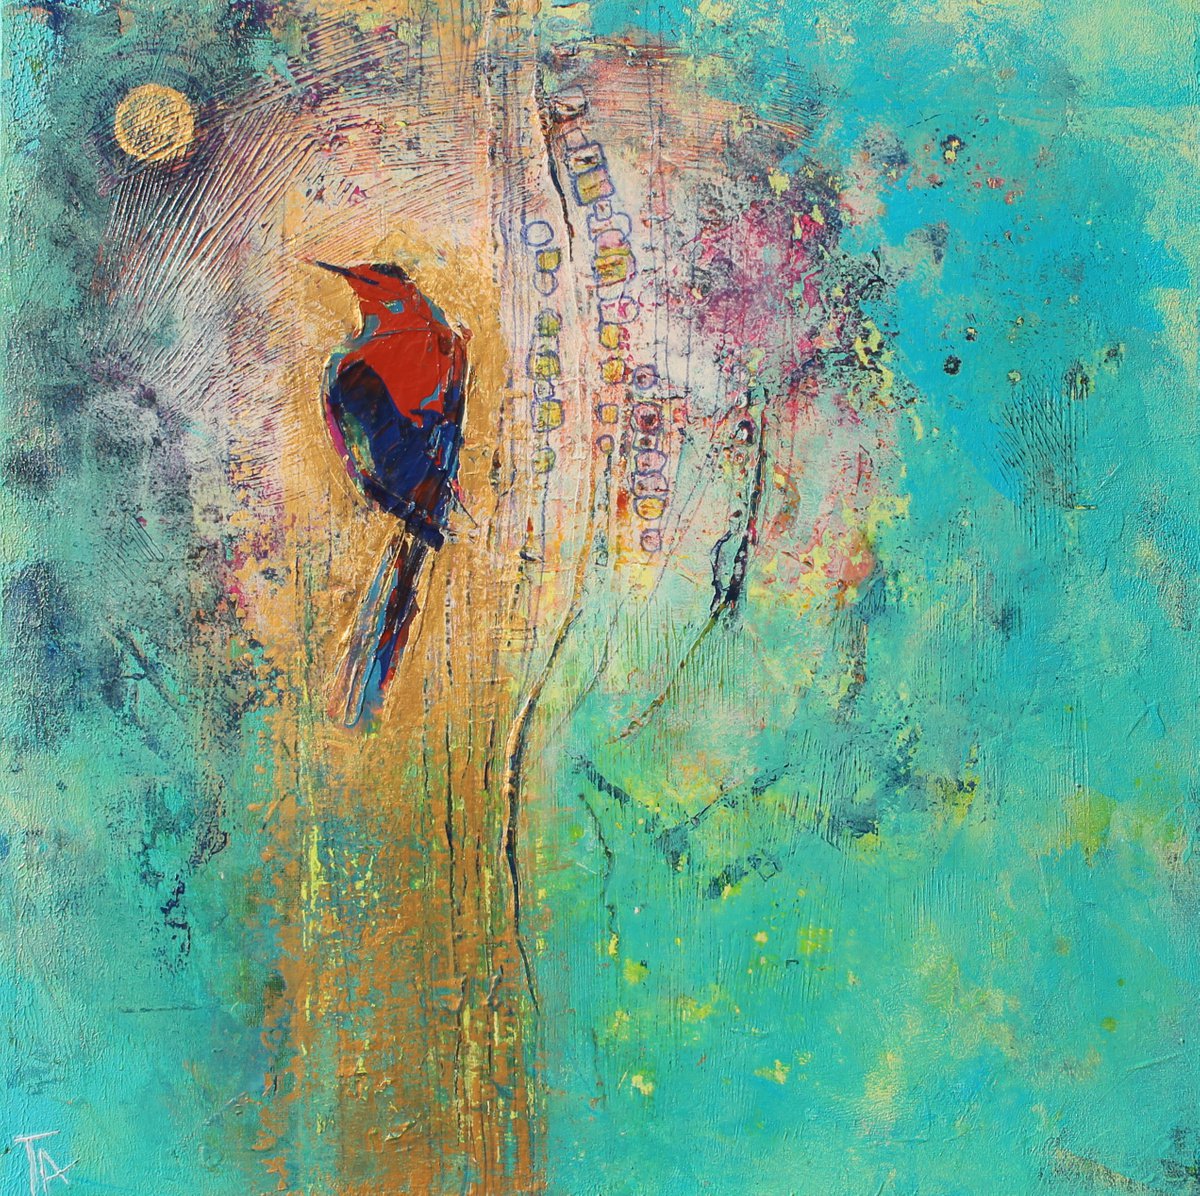 Abstraction with a bird by Tatyana Ausheva